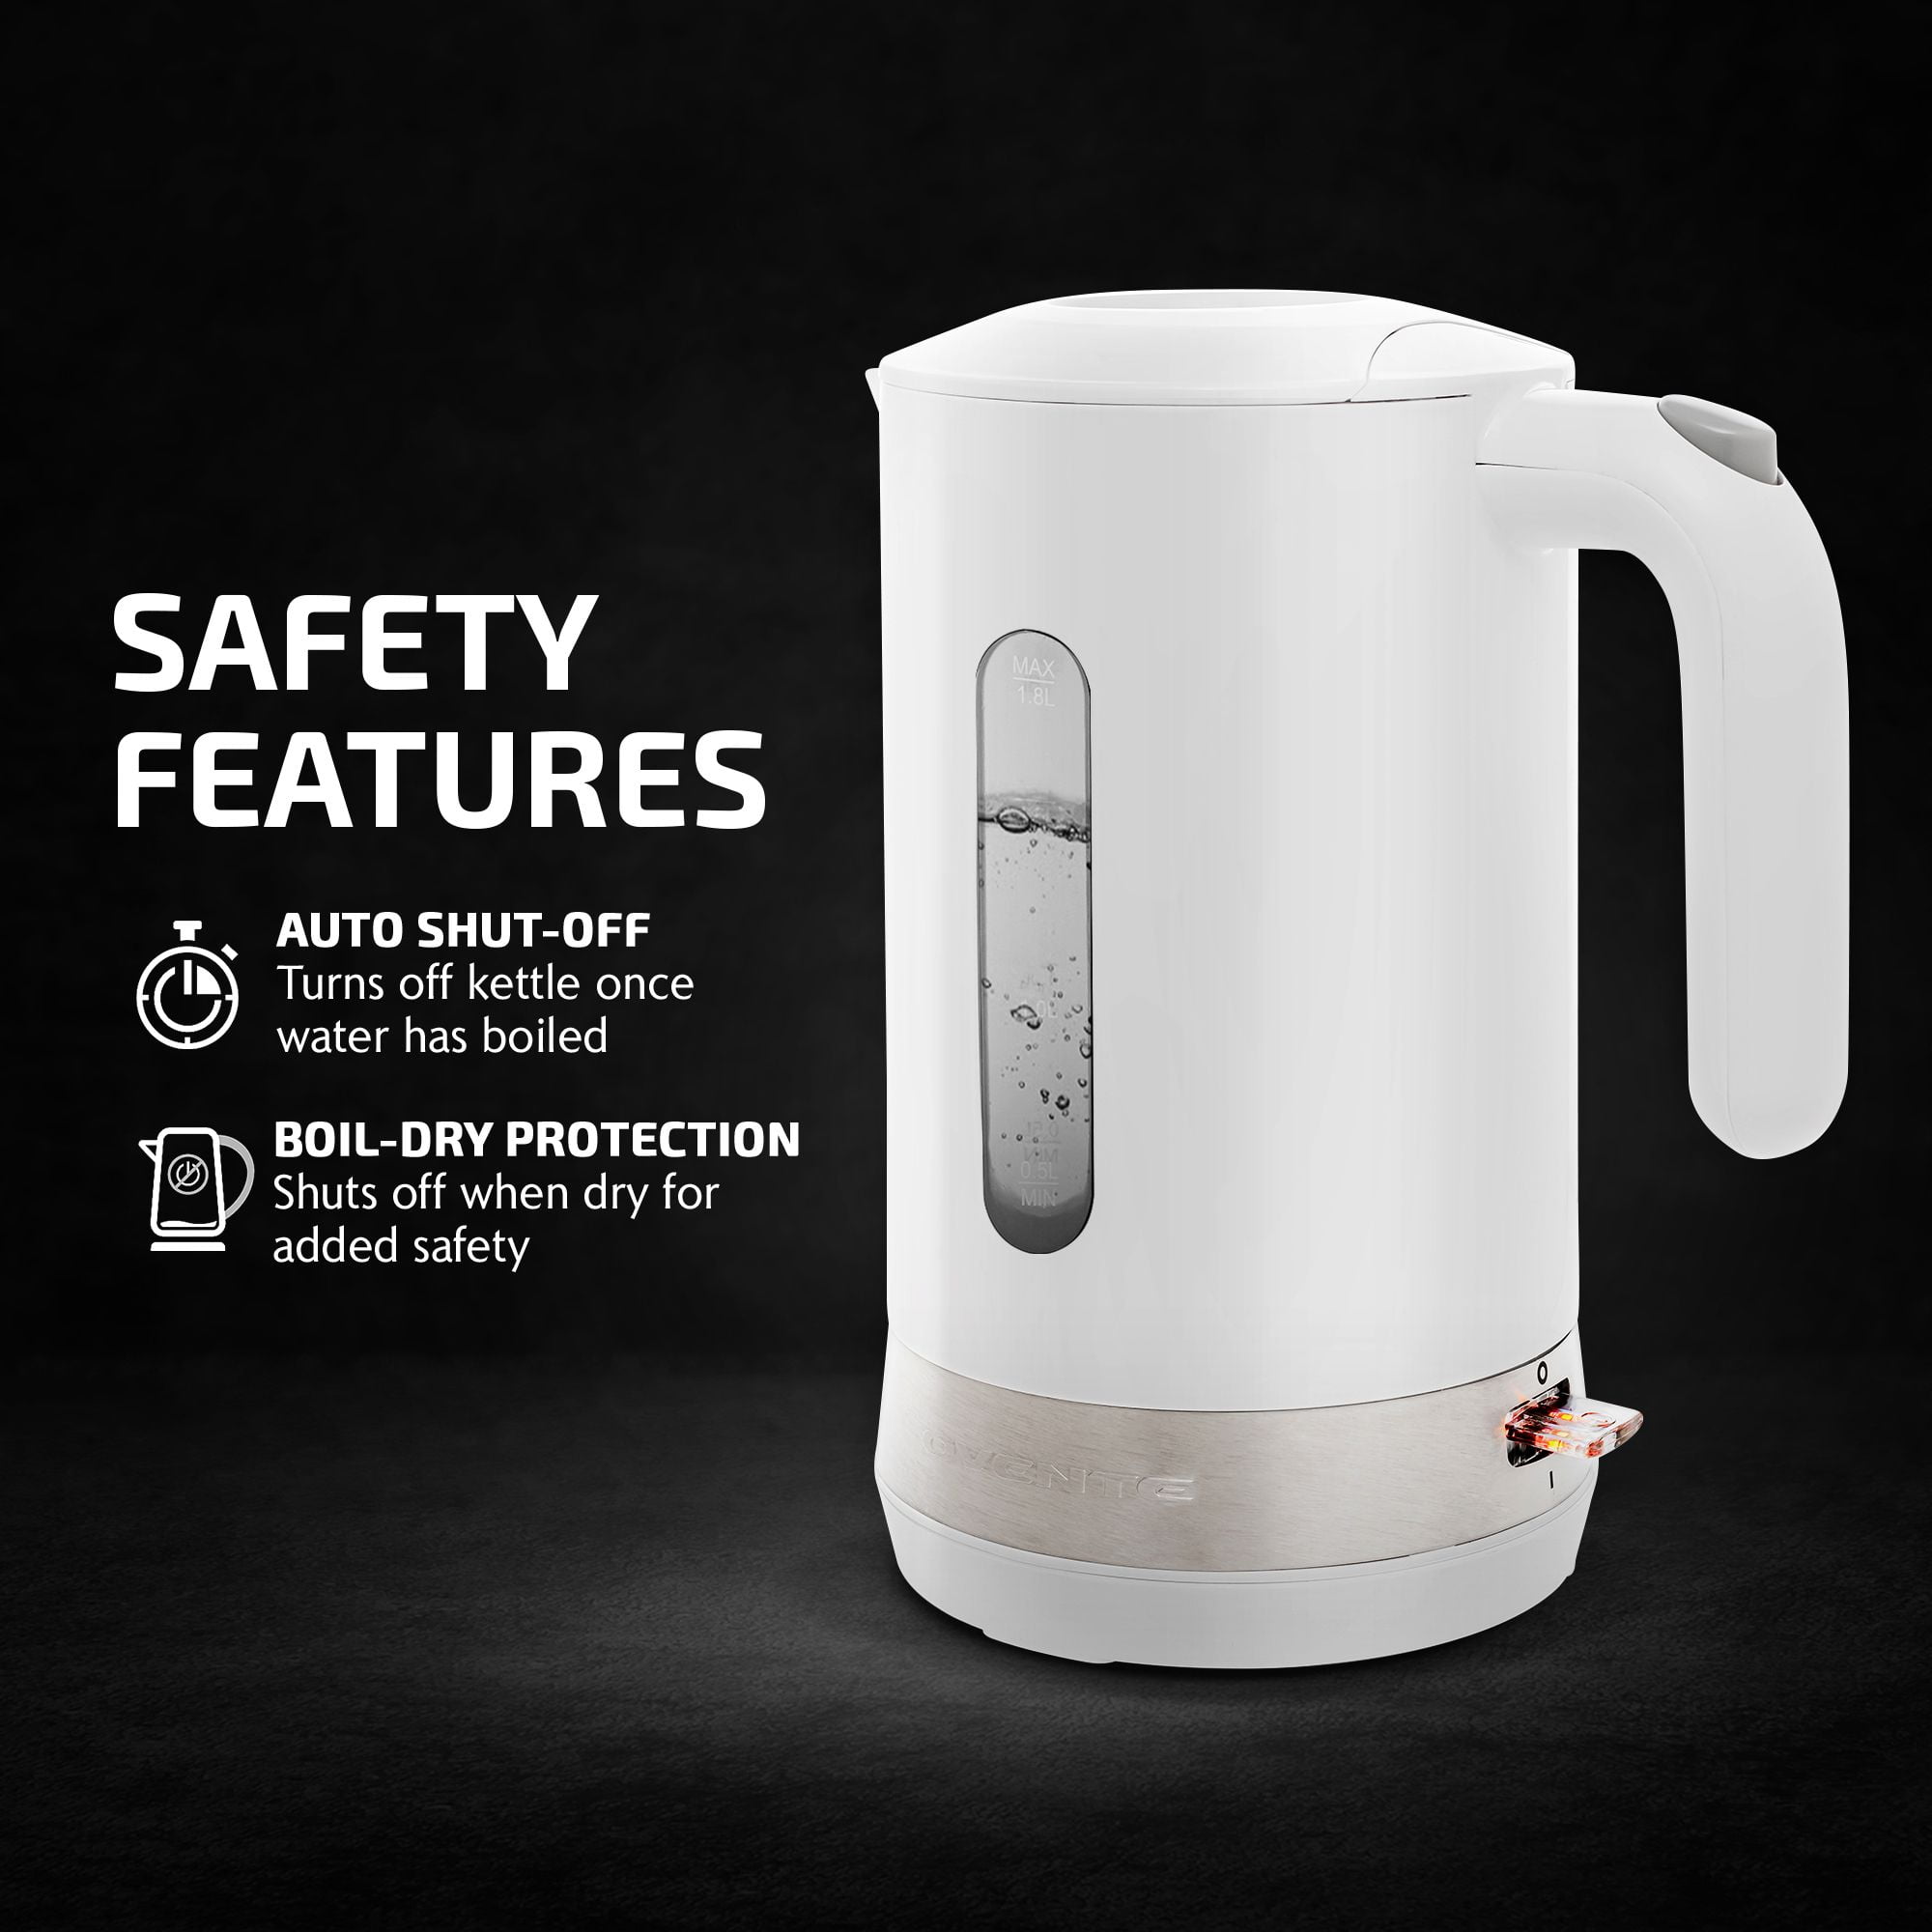 OVENTE Portable Tea Kettle and Instant Water Heater 1-Cup 1.8